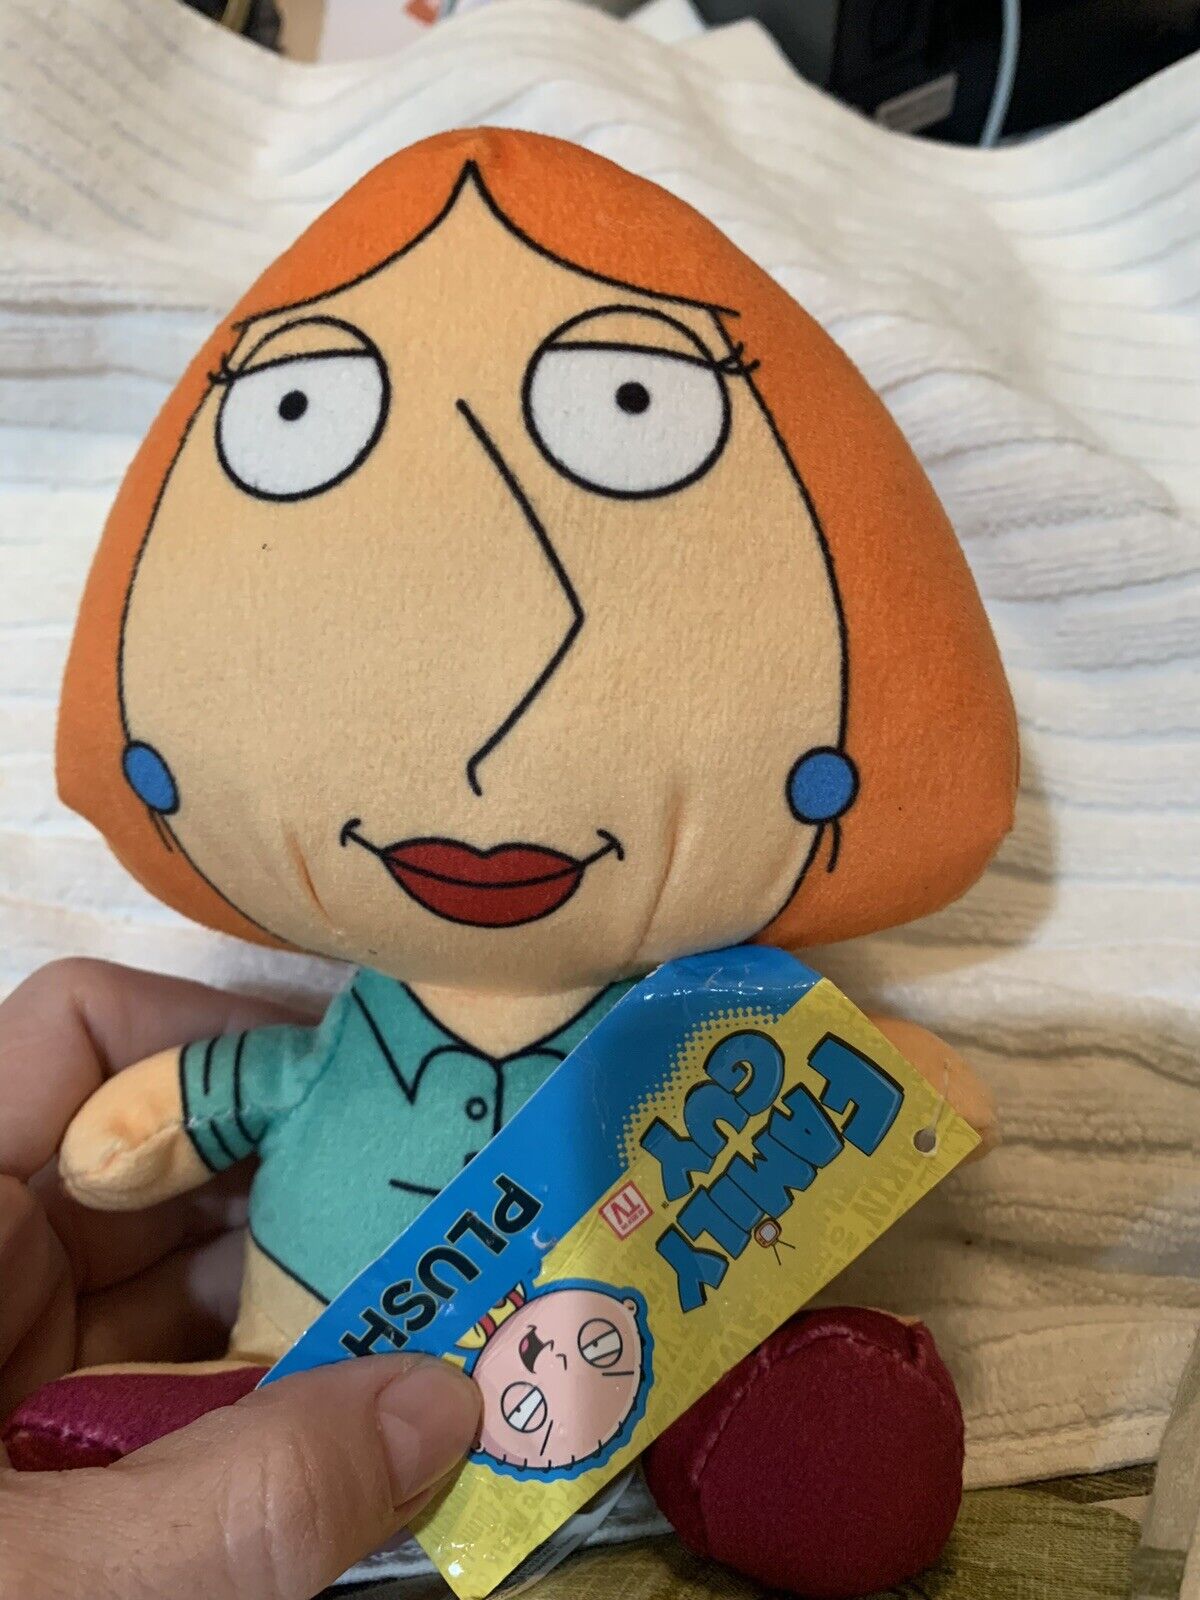 Lois Griffin Plush Family Guy 20th Century Fox Toy Factory 2022 7” Doll Toy